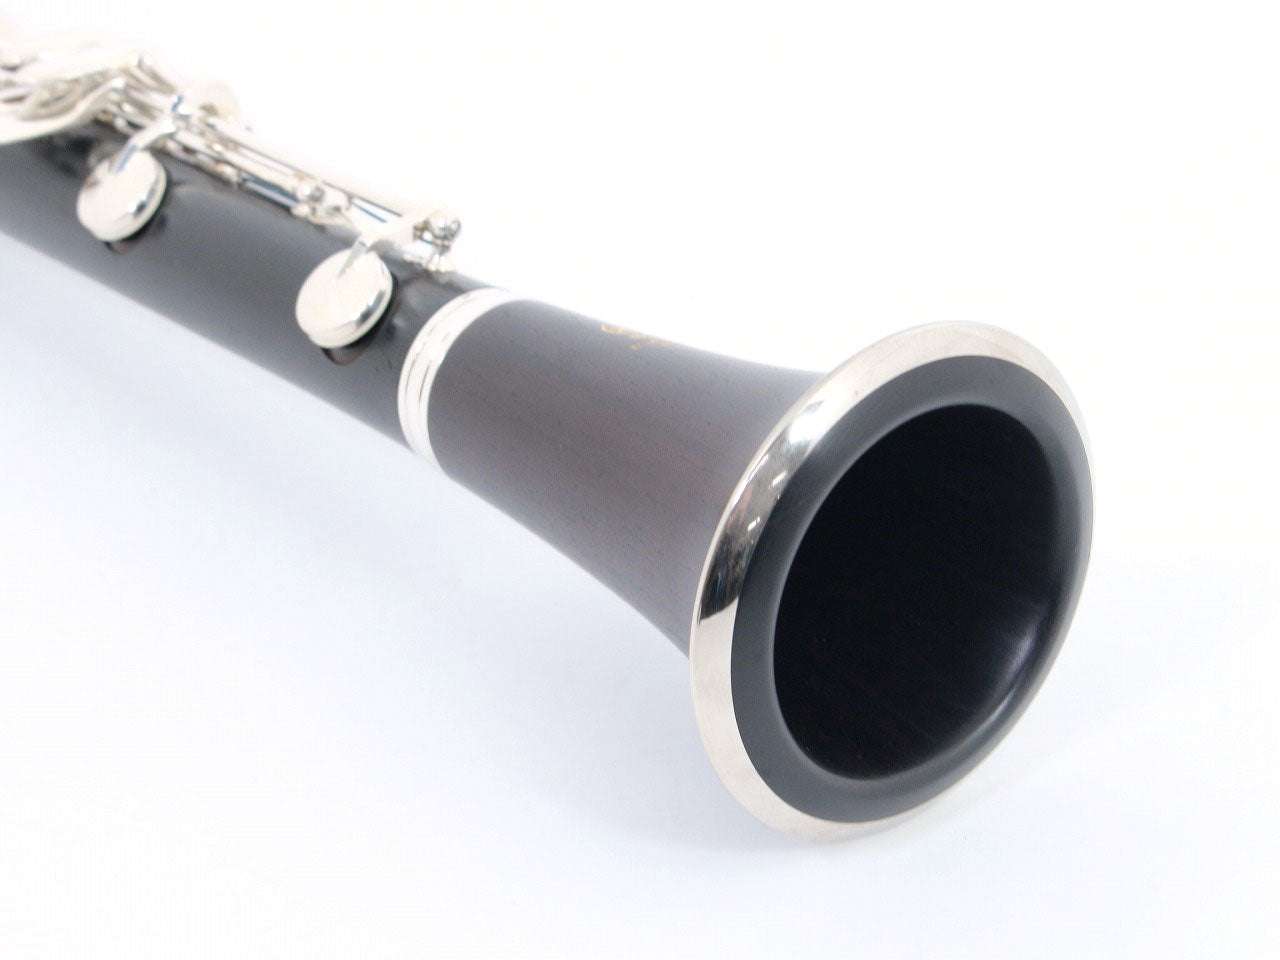 [SN 301043] USED YAMAHA / B-flat Clarinet YCL-450, all tampos replaced [09]